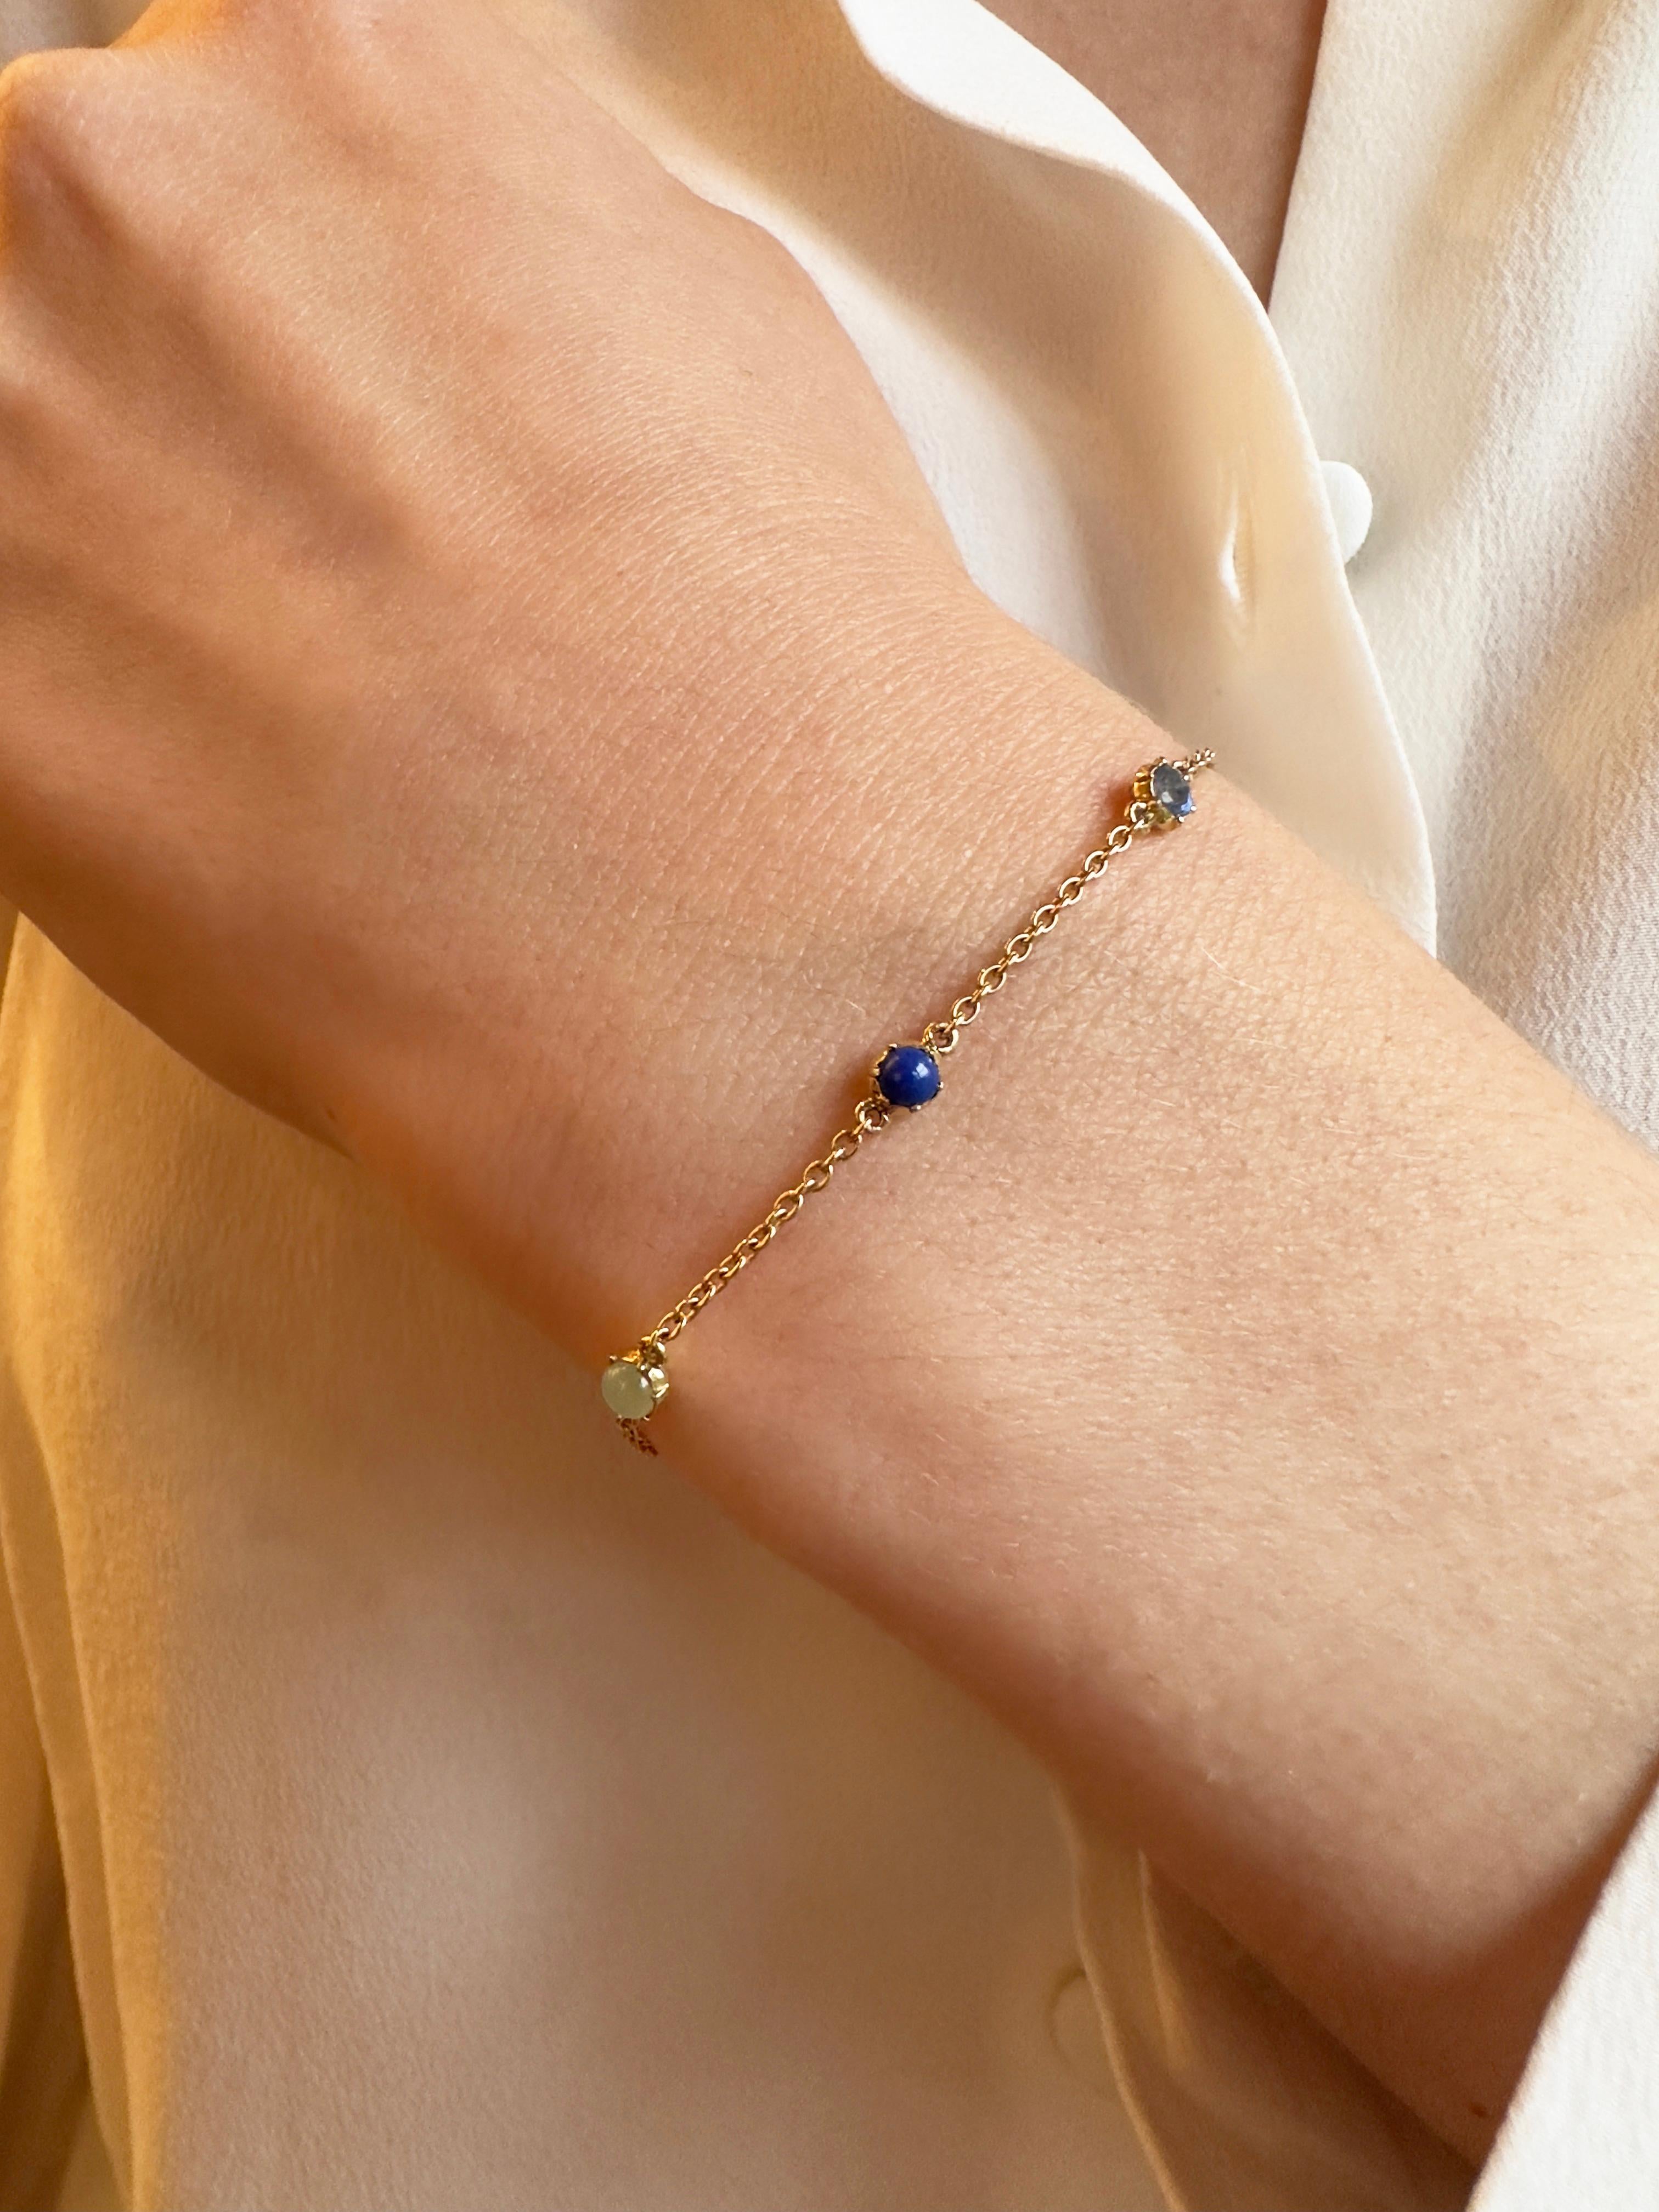 This lovely bracelet hides a secret acrostic message, meaning the first letter of each gemstone spells out a word. In this case, there's a Labradorite, Ultramarine (lapis lazuli), Chrysoprase, Kyanite, and Yellow sapphire to spell out 